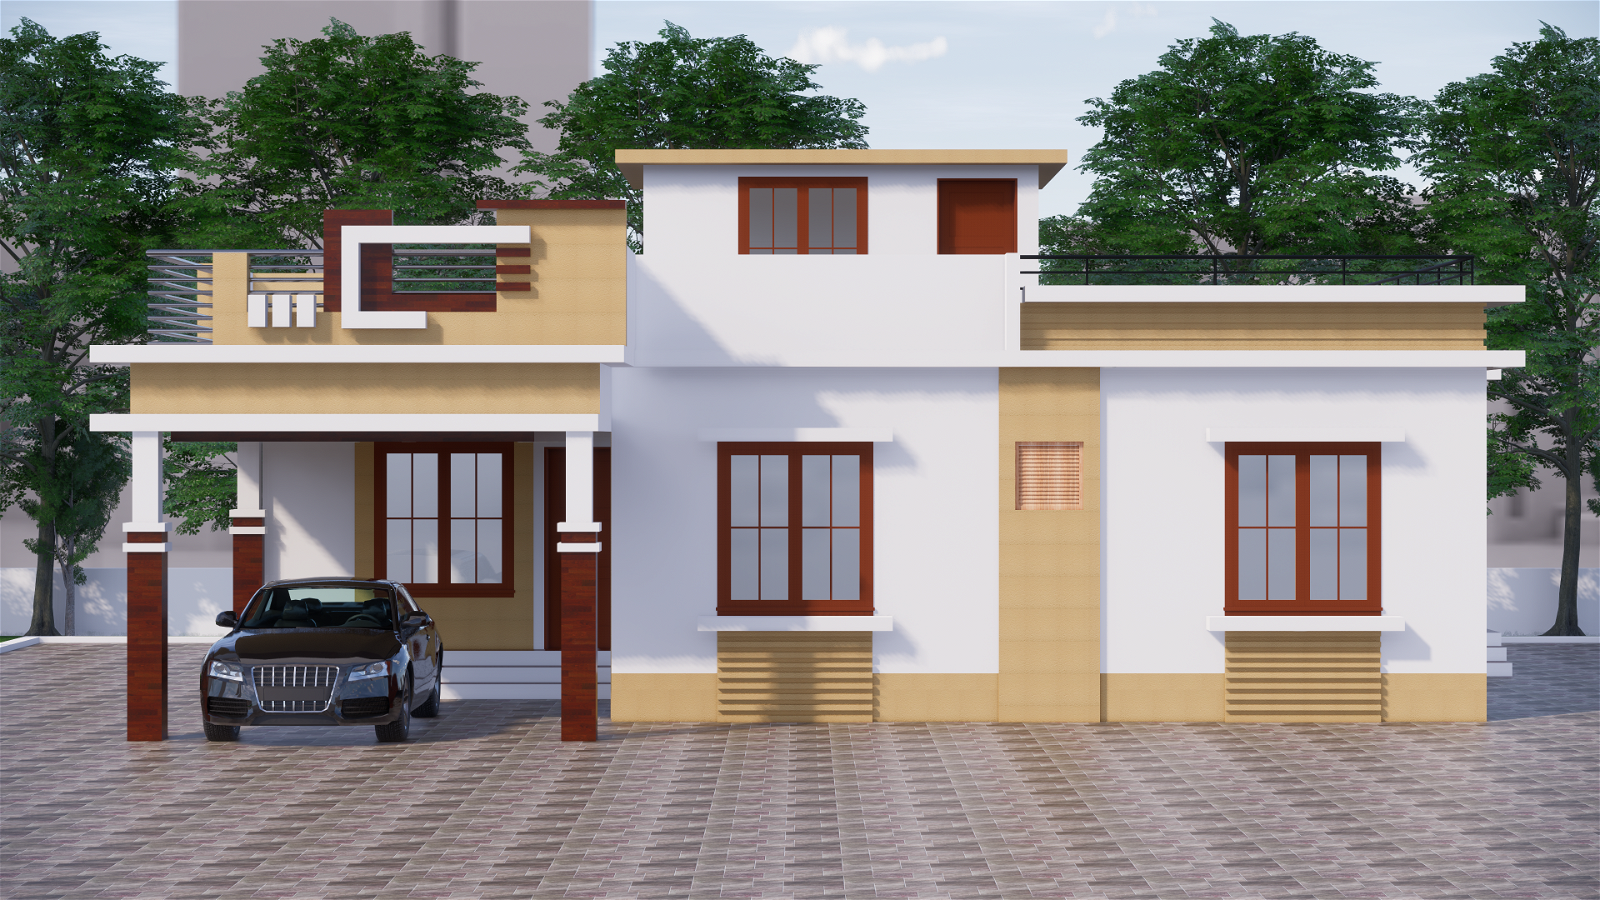 Simple and neat modern Bungalow elevation design Revit file .Download ...